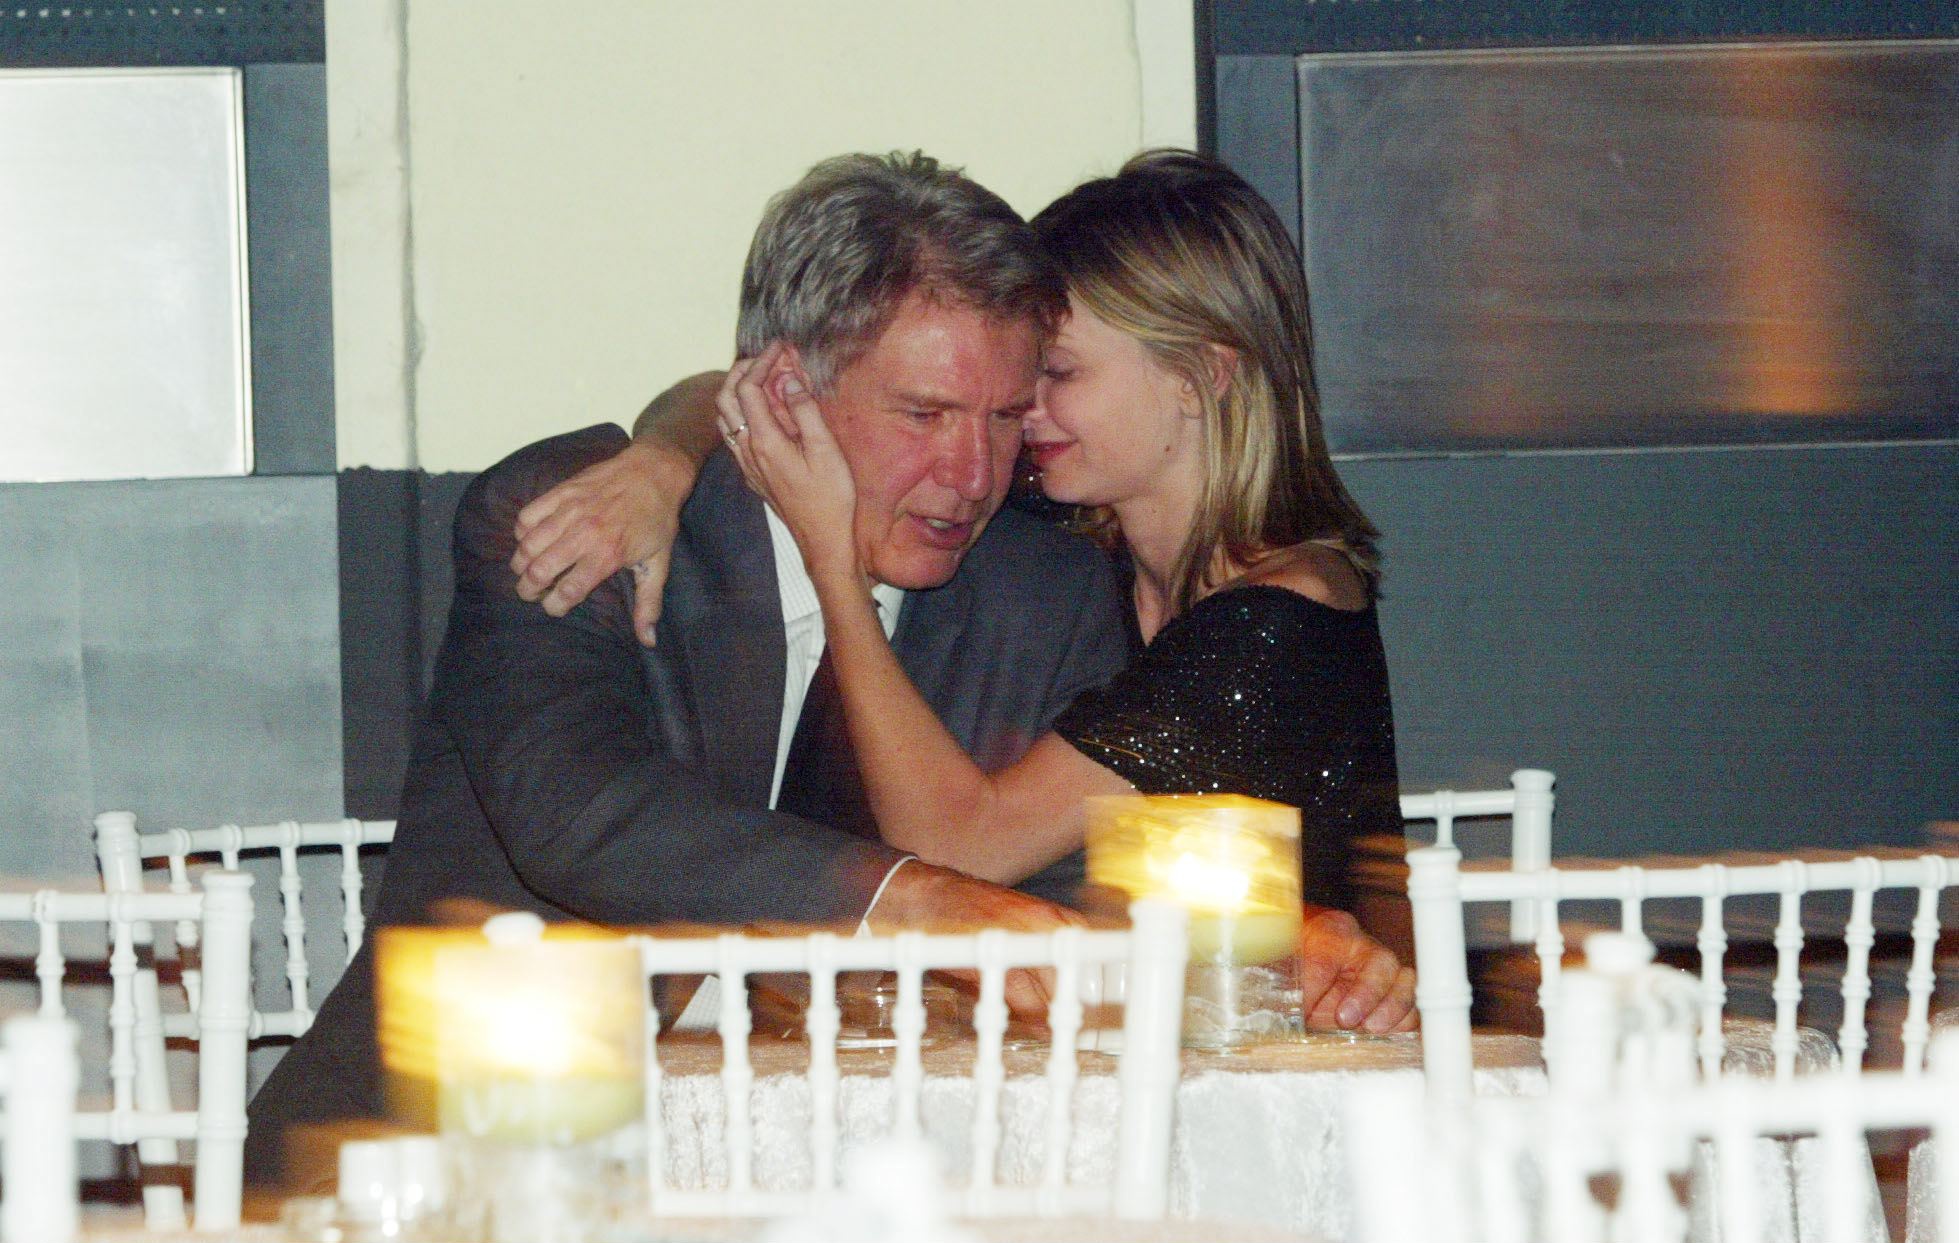 Harrison Ford Calista Flockhart, 2002 | Source: Getty Images